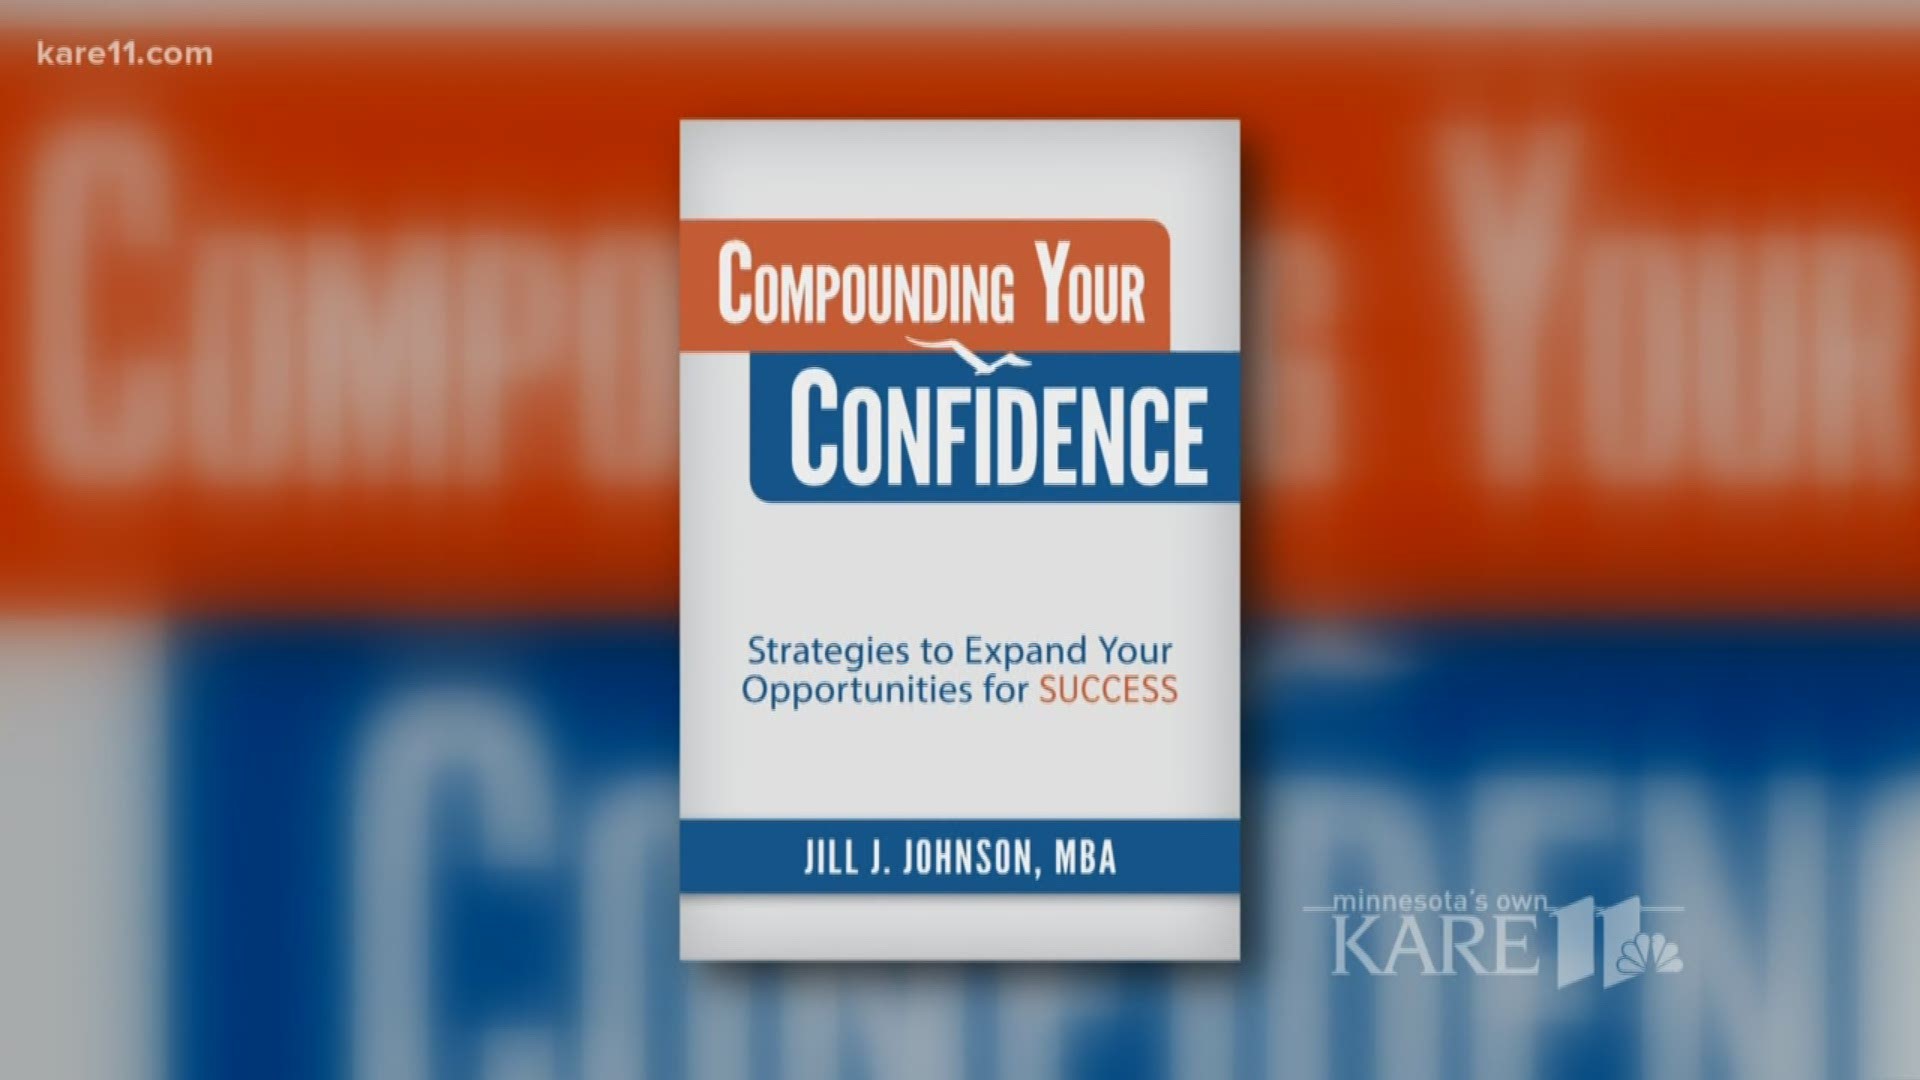 'Compounding Your Confidence' to success